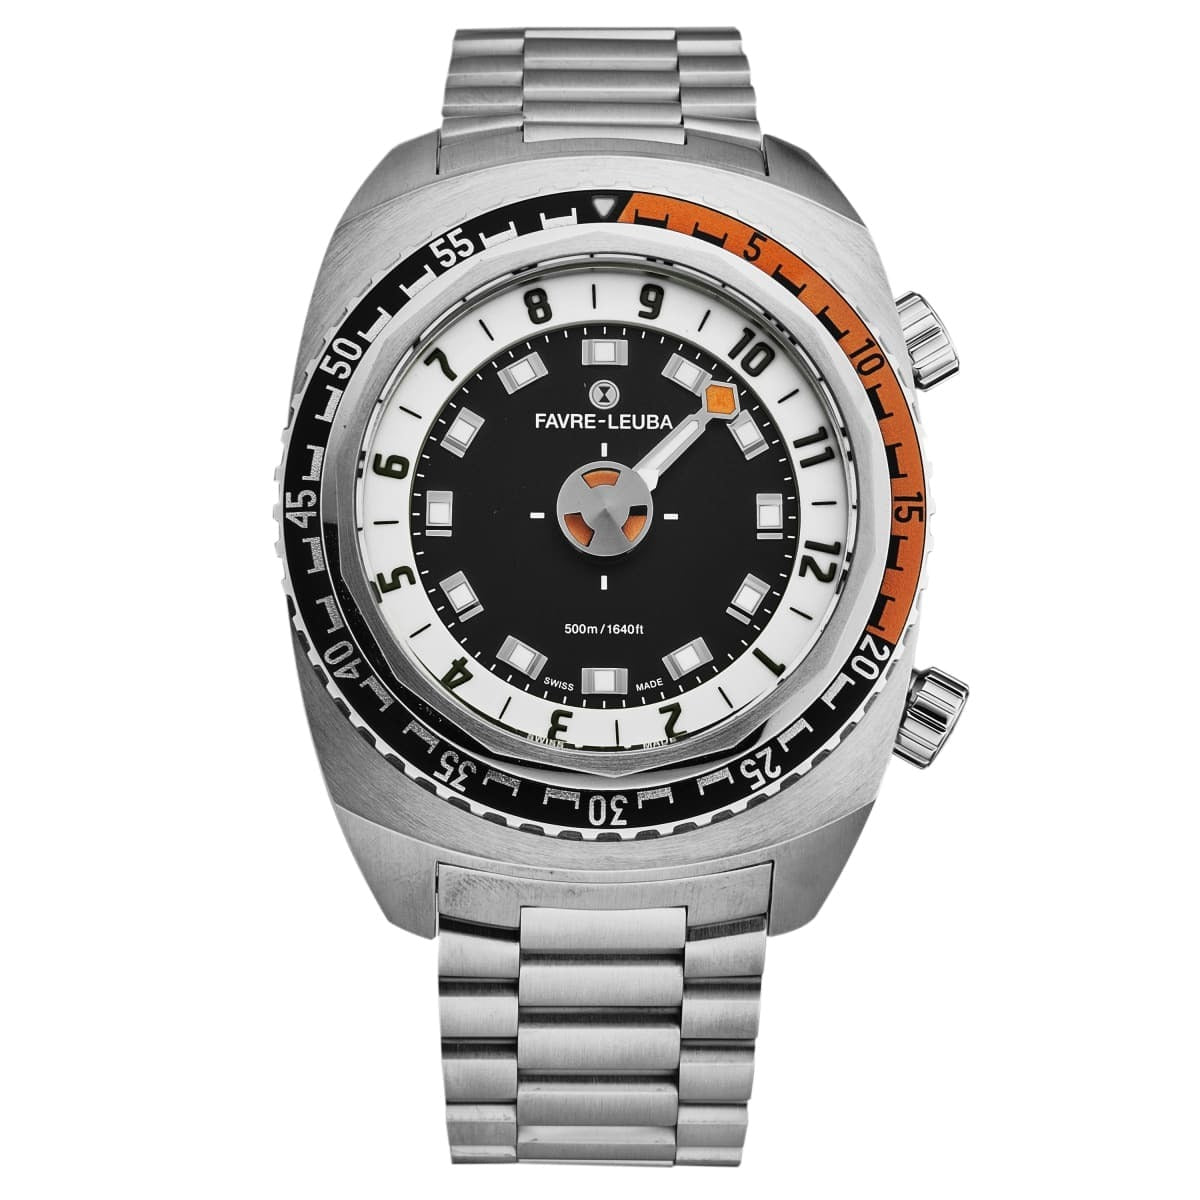 A Favre-Leuba Men's 00.10101.08.13.20 'Raider Harpoon' Black White Dial Stainless Steel Bracelet Automatic Watch with a black and orange design, showcased on a white background.